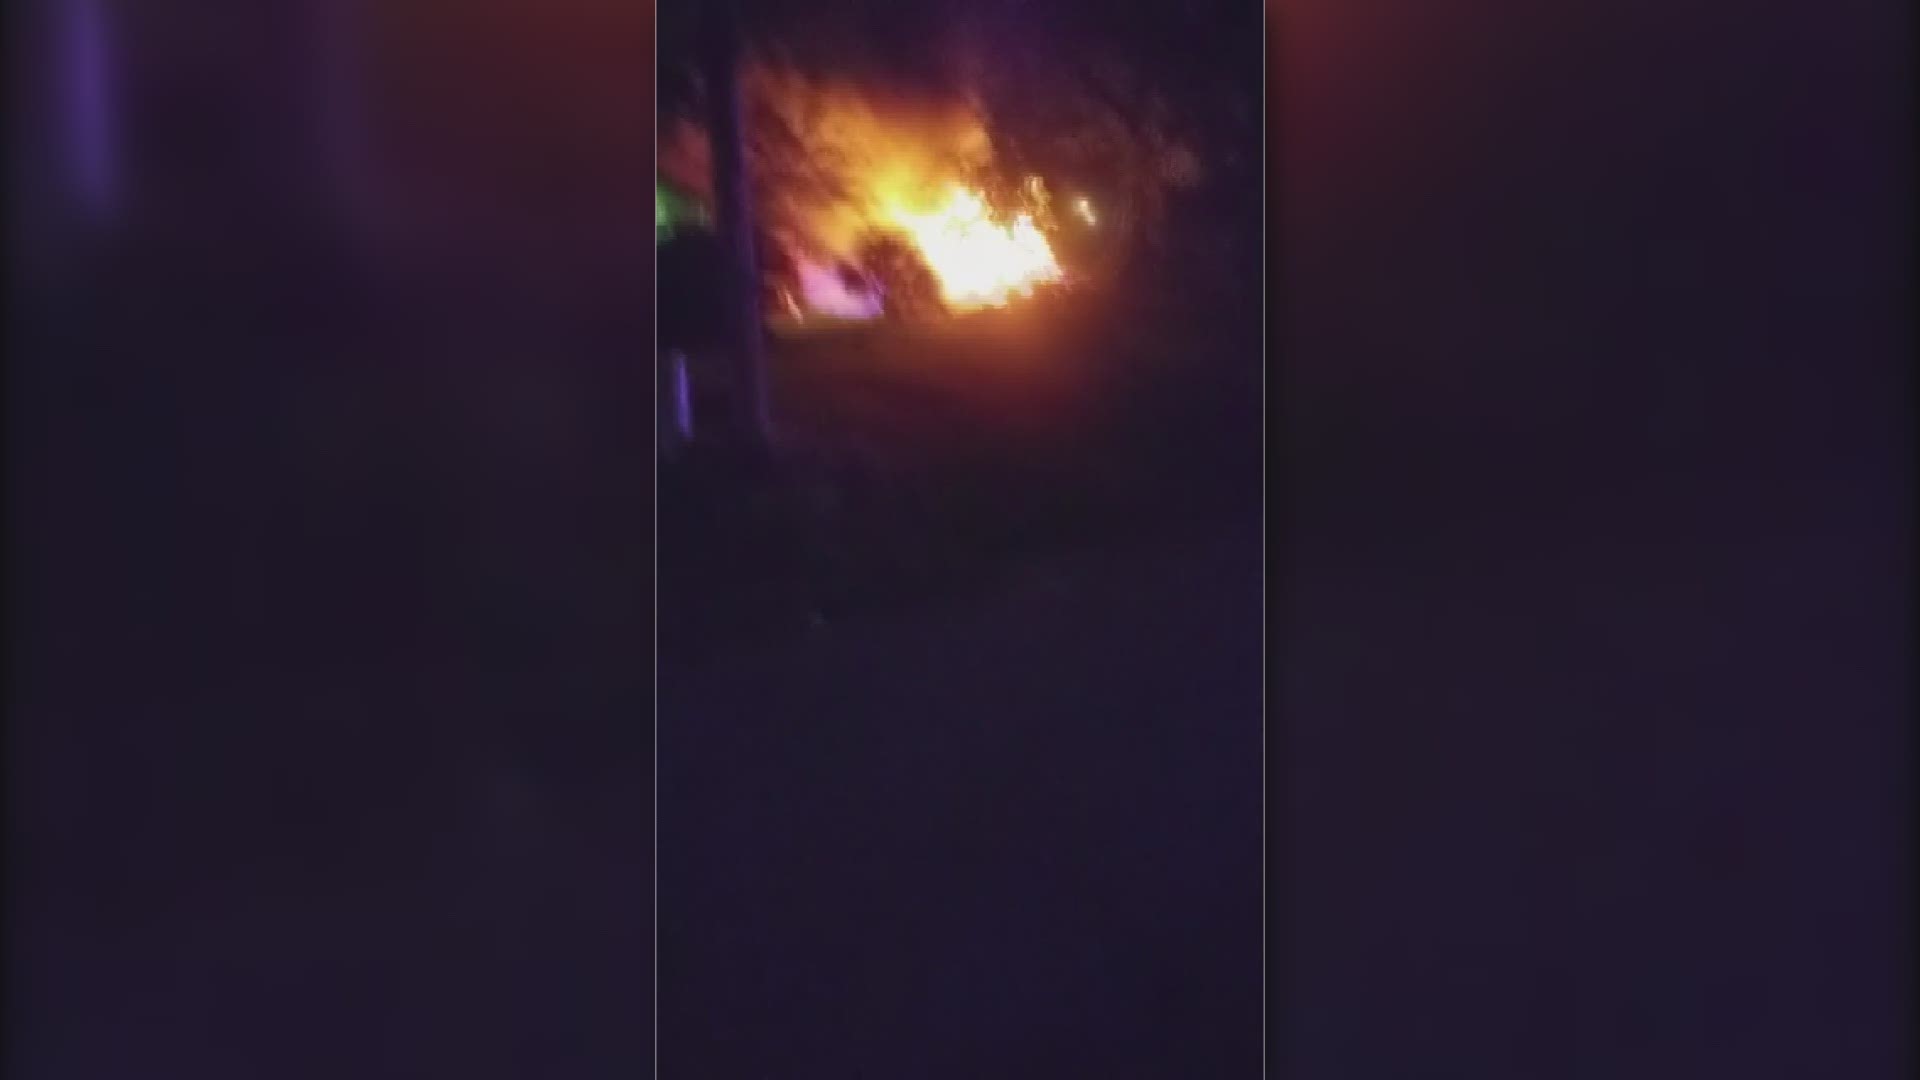 A neighbor recorded this video when he saw a house in flames in the Durkeeville area. Three adults were in the home at the time, one was transported to a local hospital with life-threatening injuries.